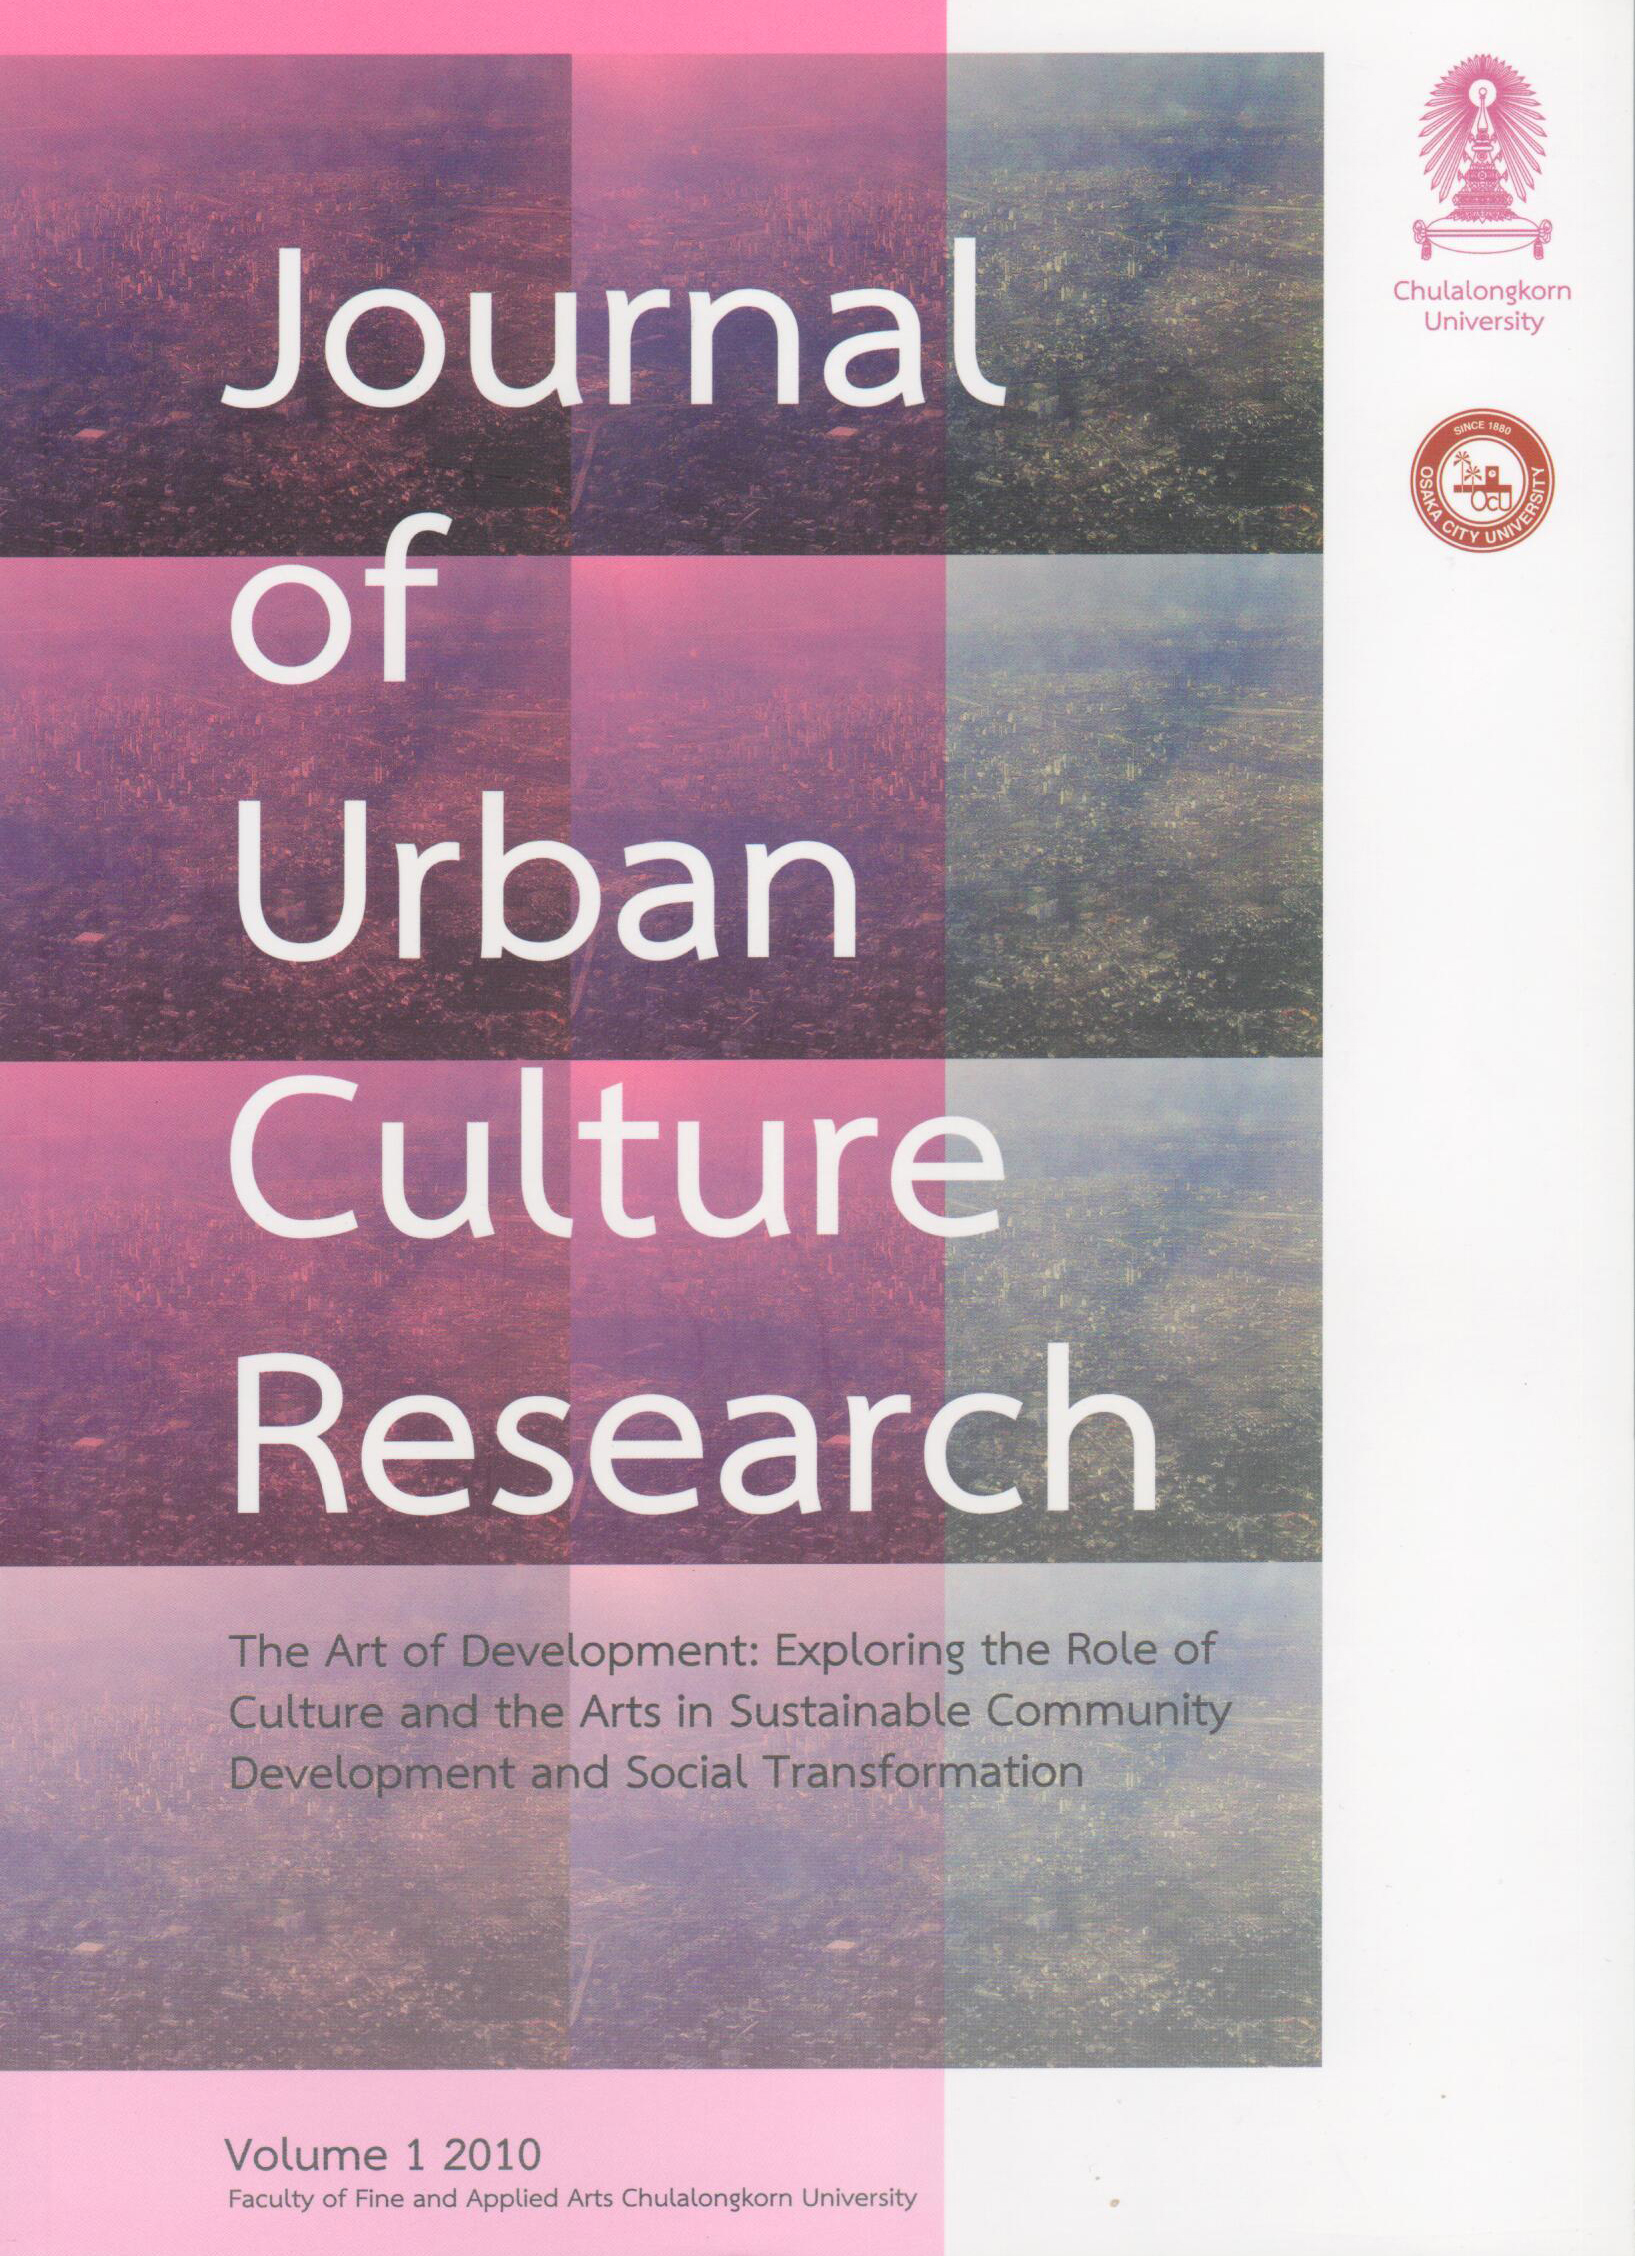 Journal of Urban Culture Research - Cover image of Bangkok, Thailand provided by Alan Kinear